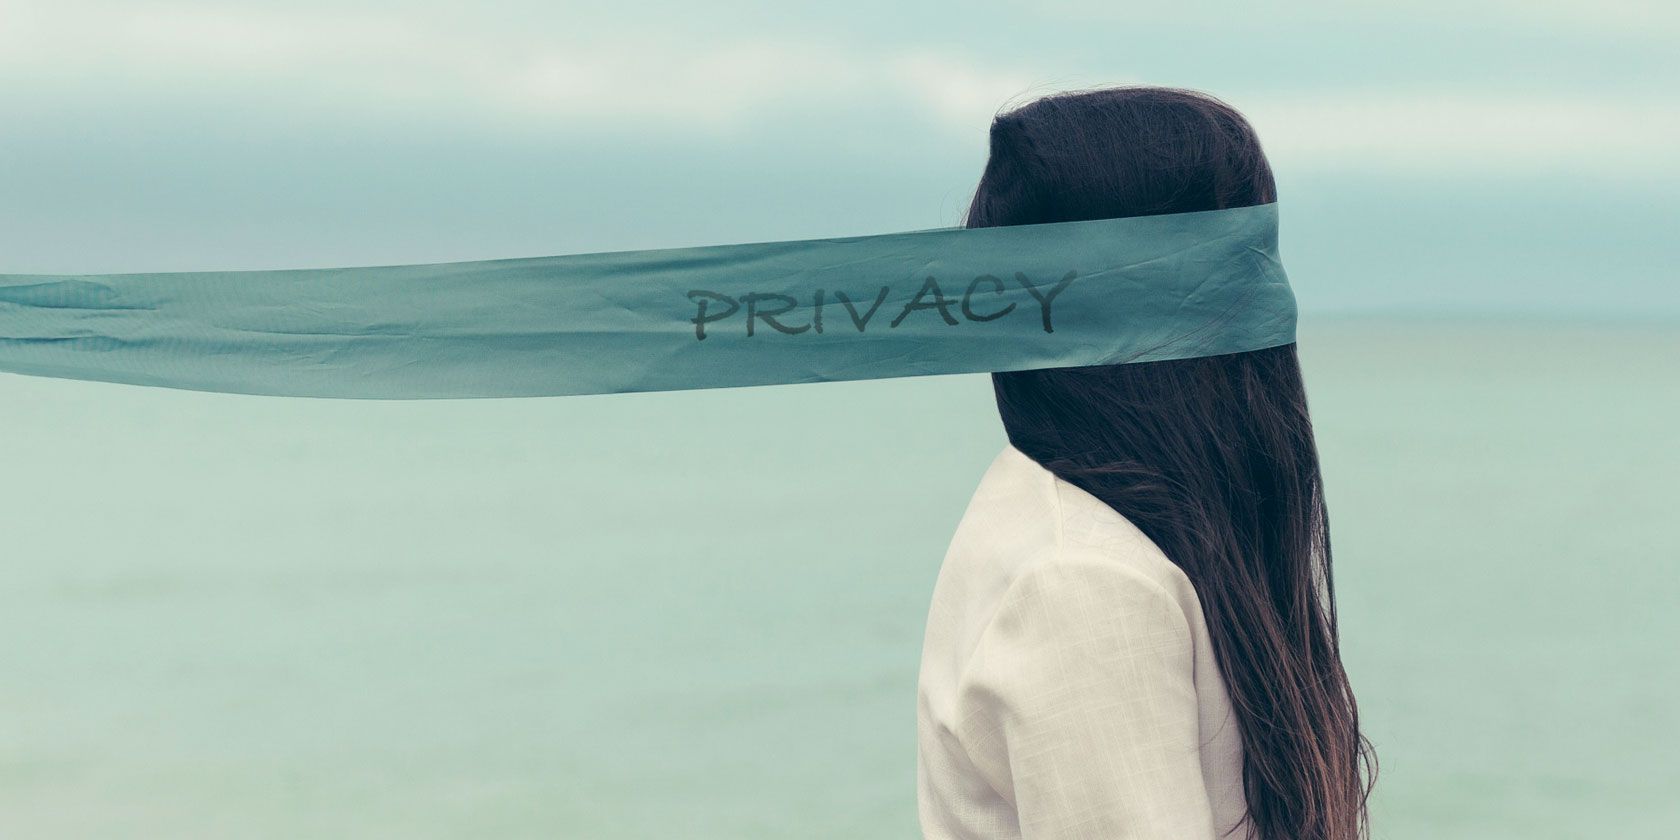 privacy-apps-install